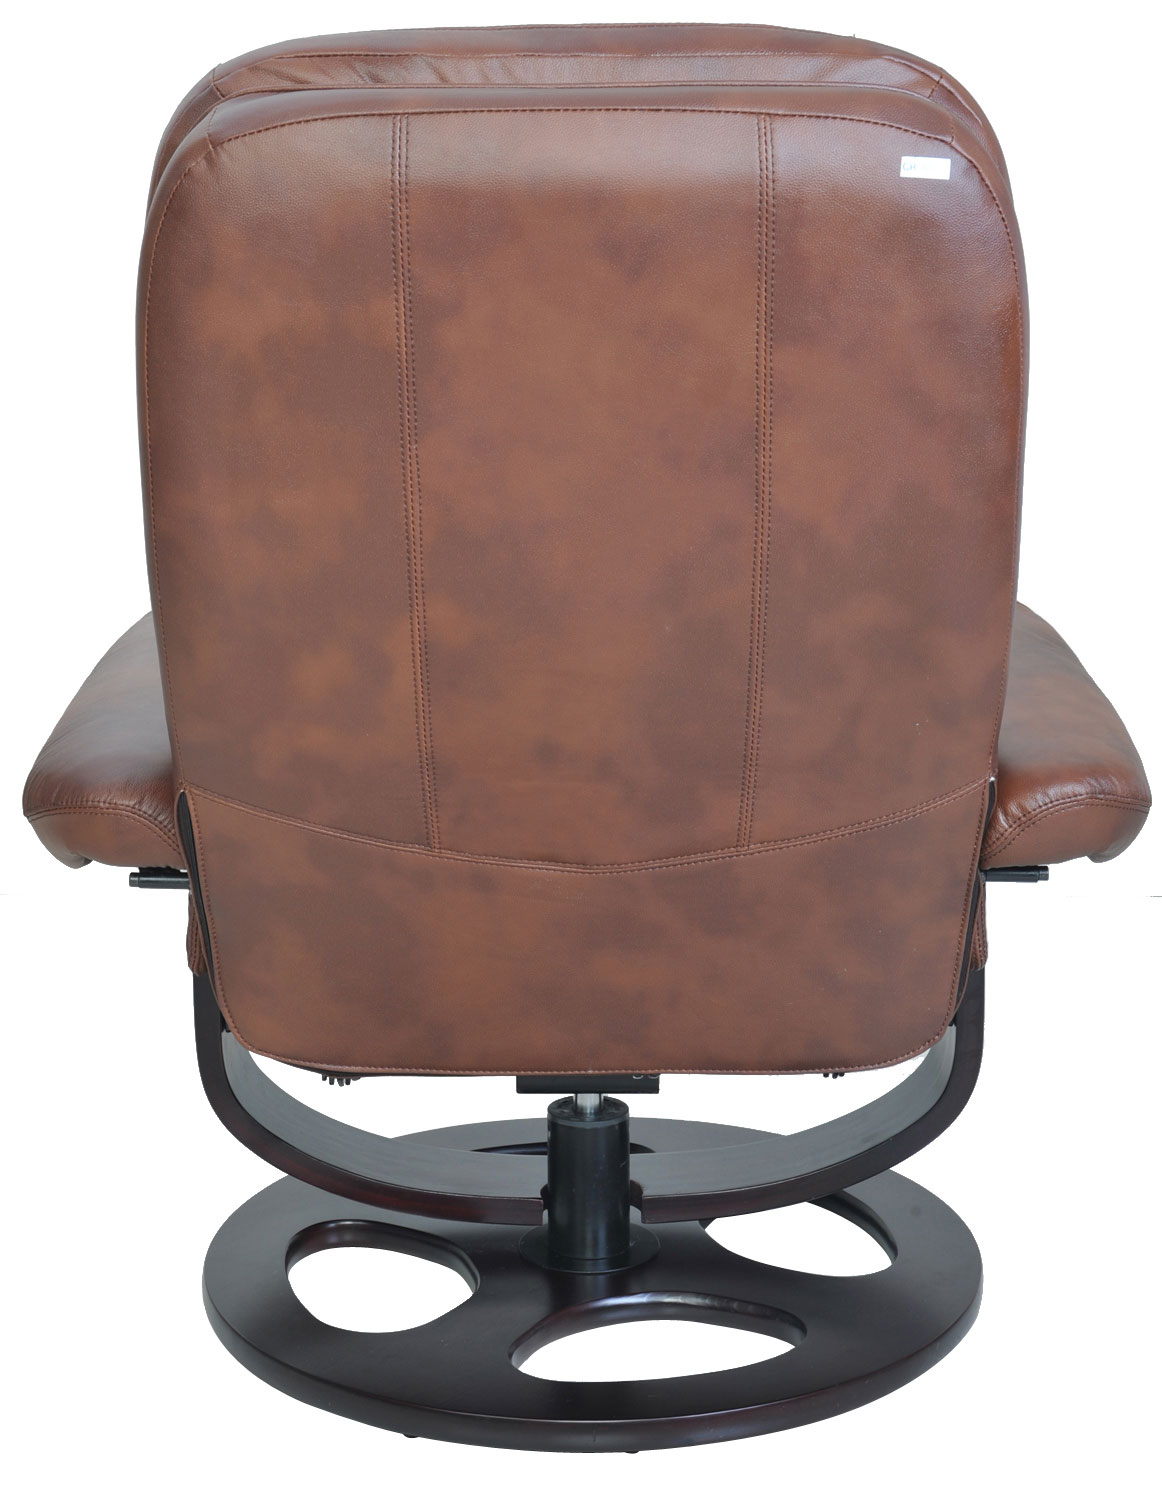 Barcalounger Jacque Pedestal Recliner Chair and Ottoman - Hilton Whiskey/Leather Match